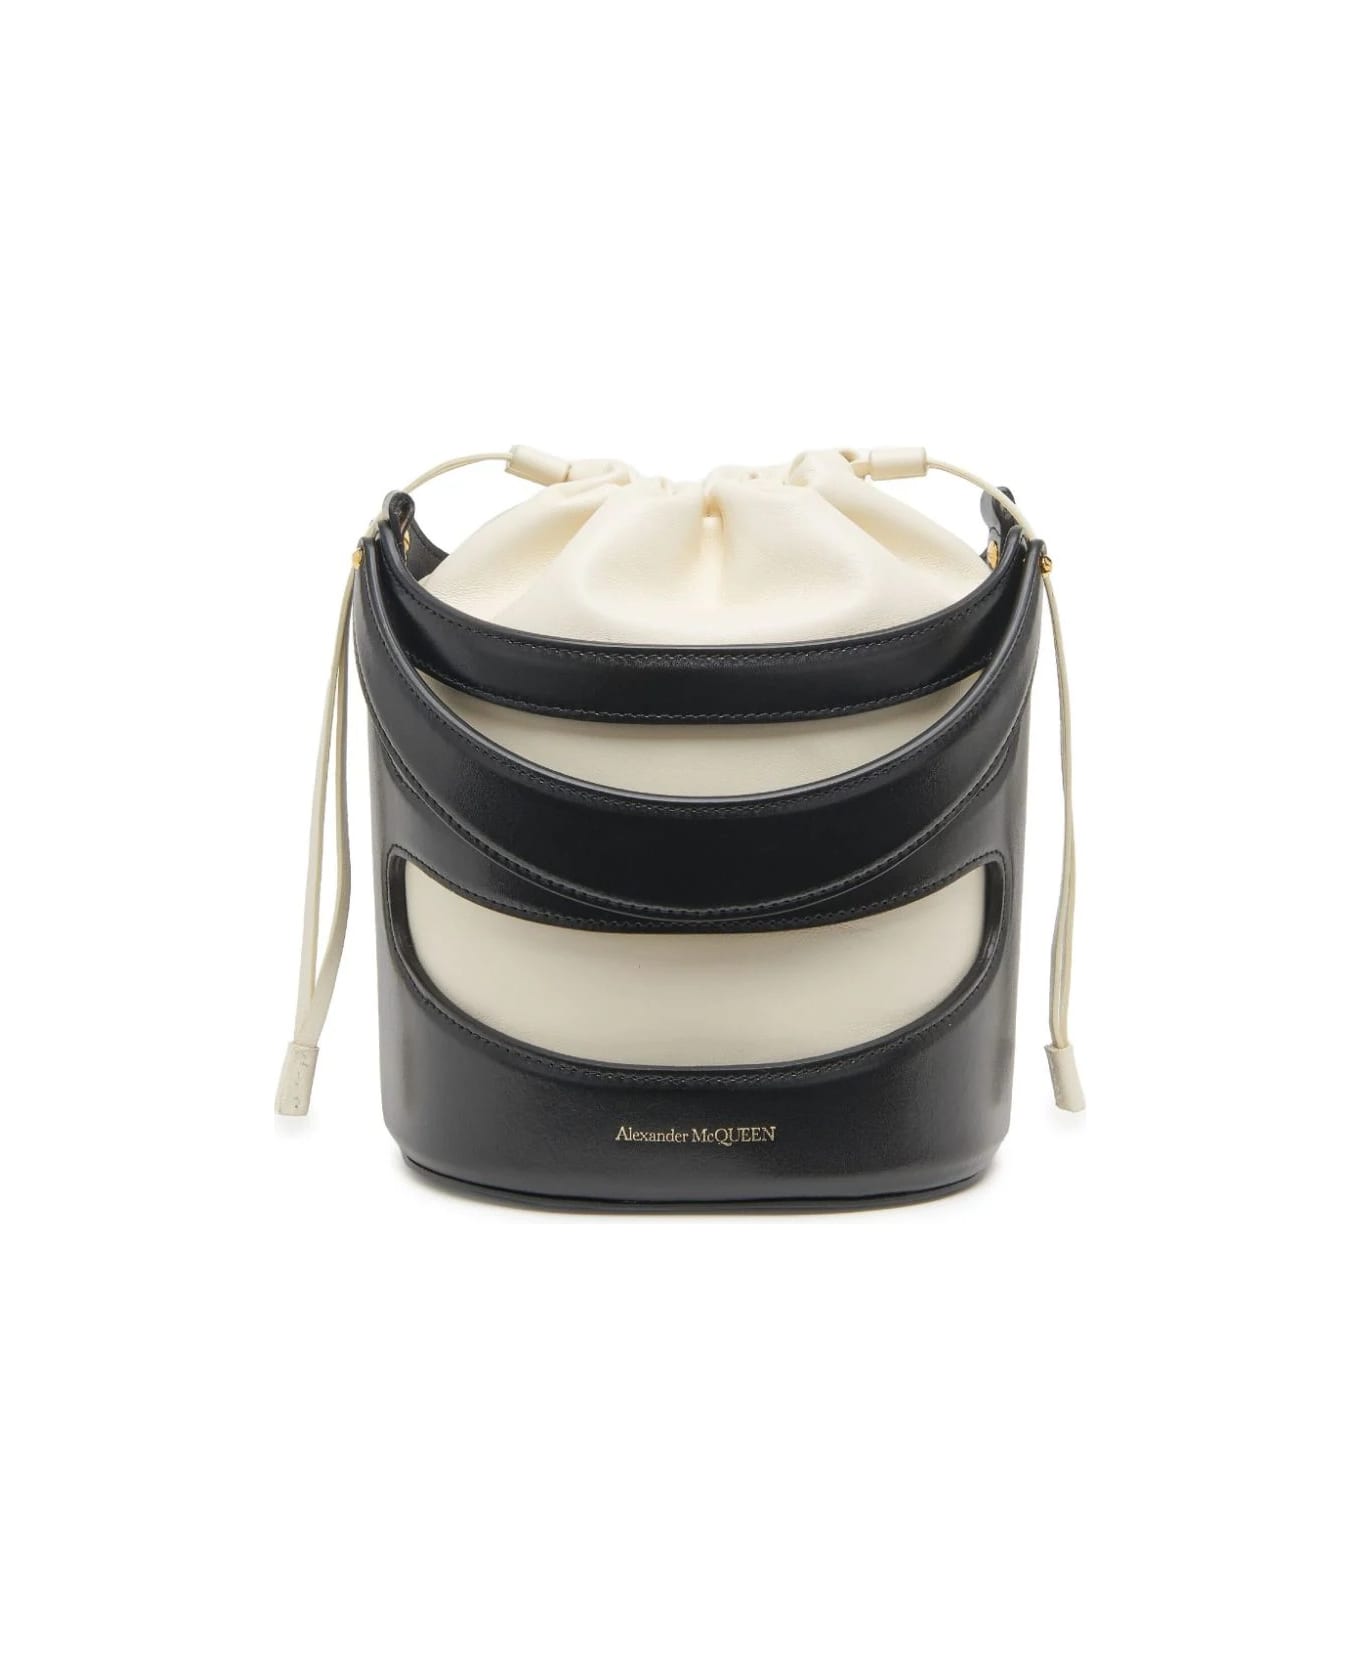 Alexander McQueen The Rise Bucket Bag In Black And Soft Ivory - White